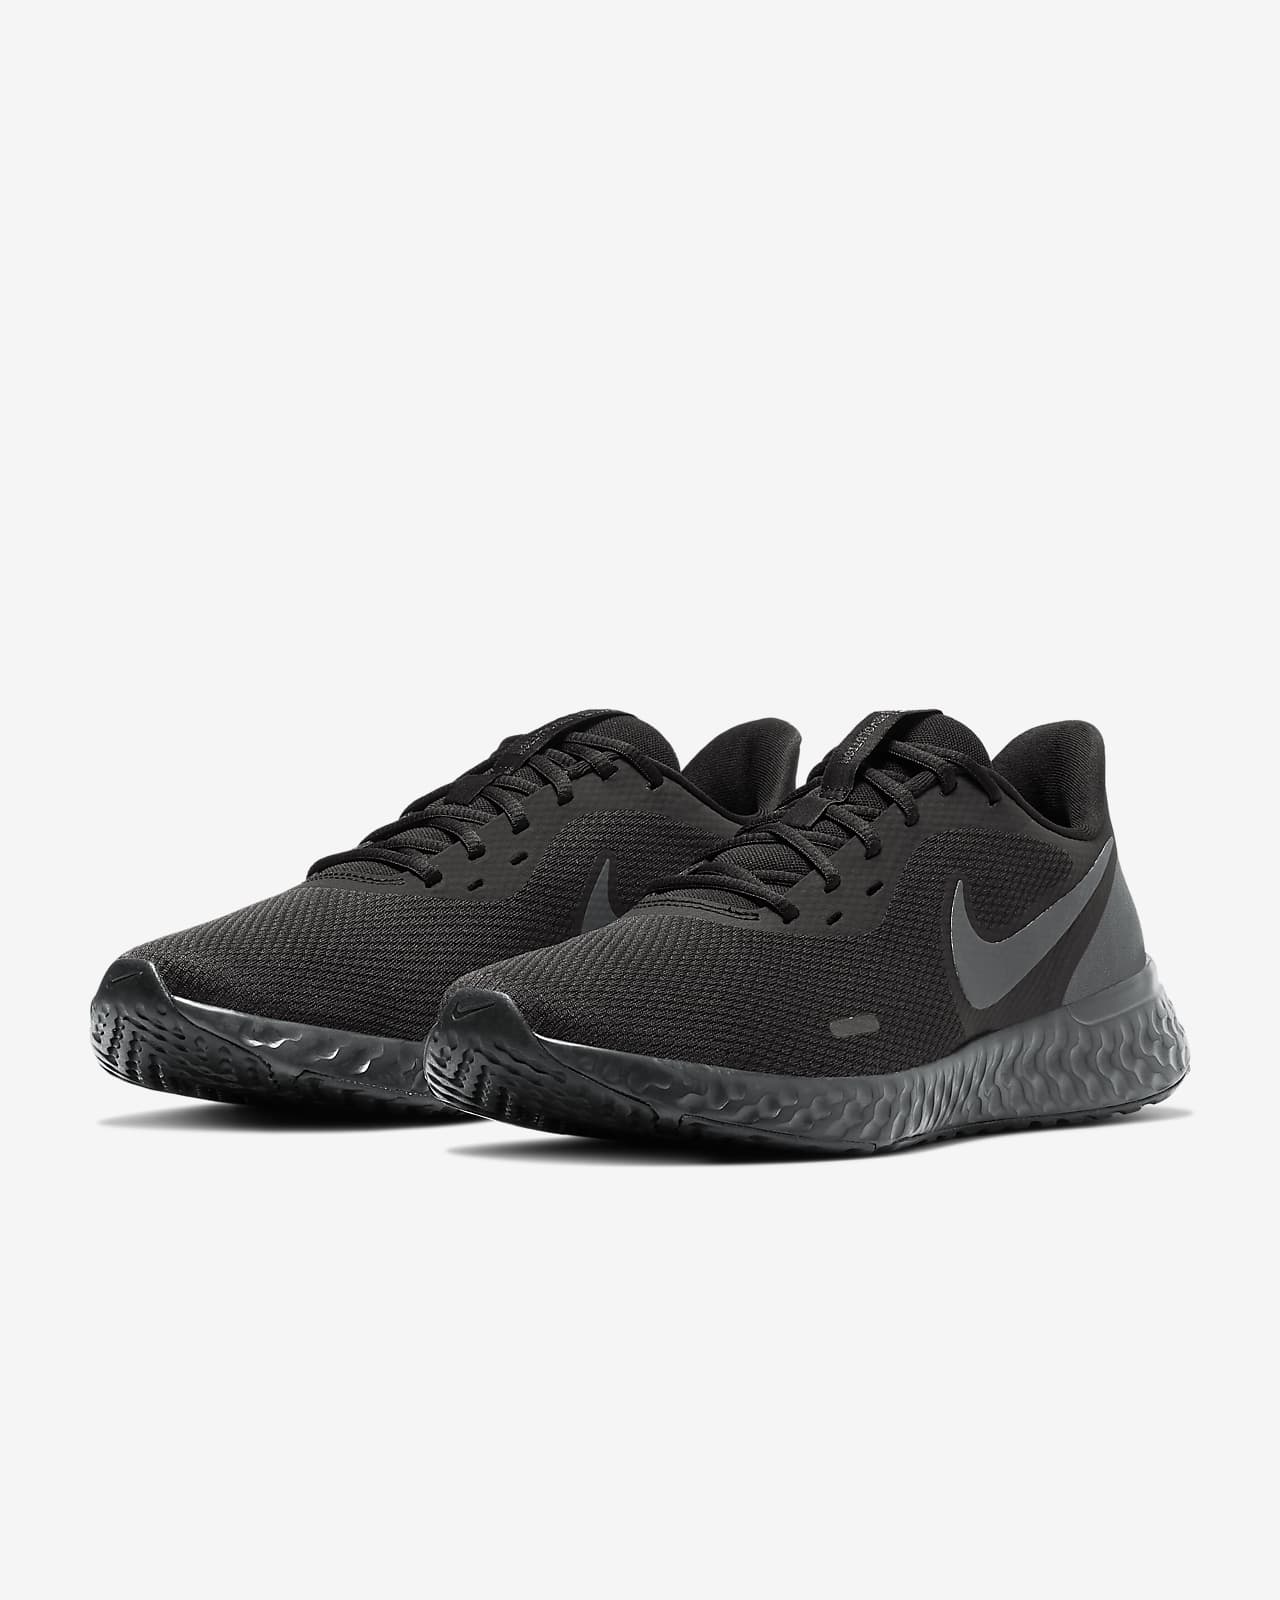 mens nike running shoes on sale